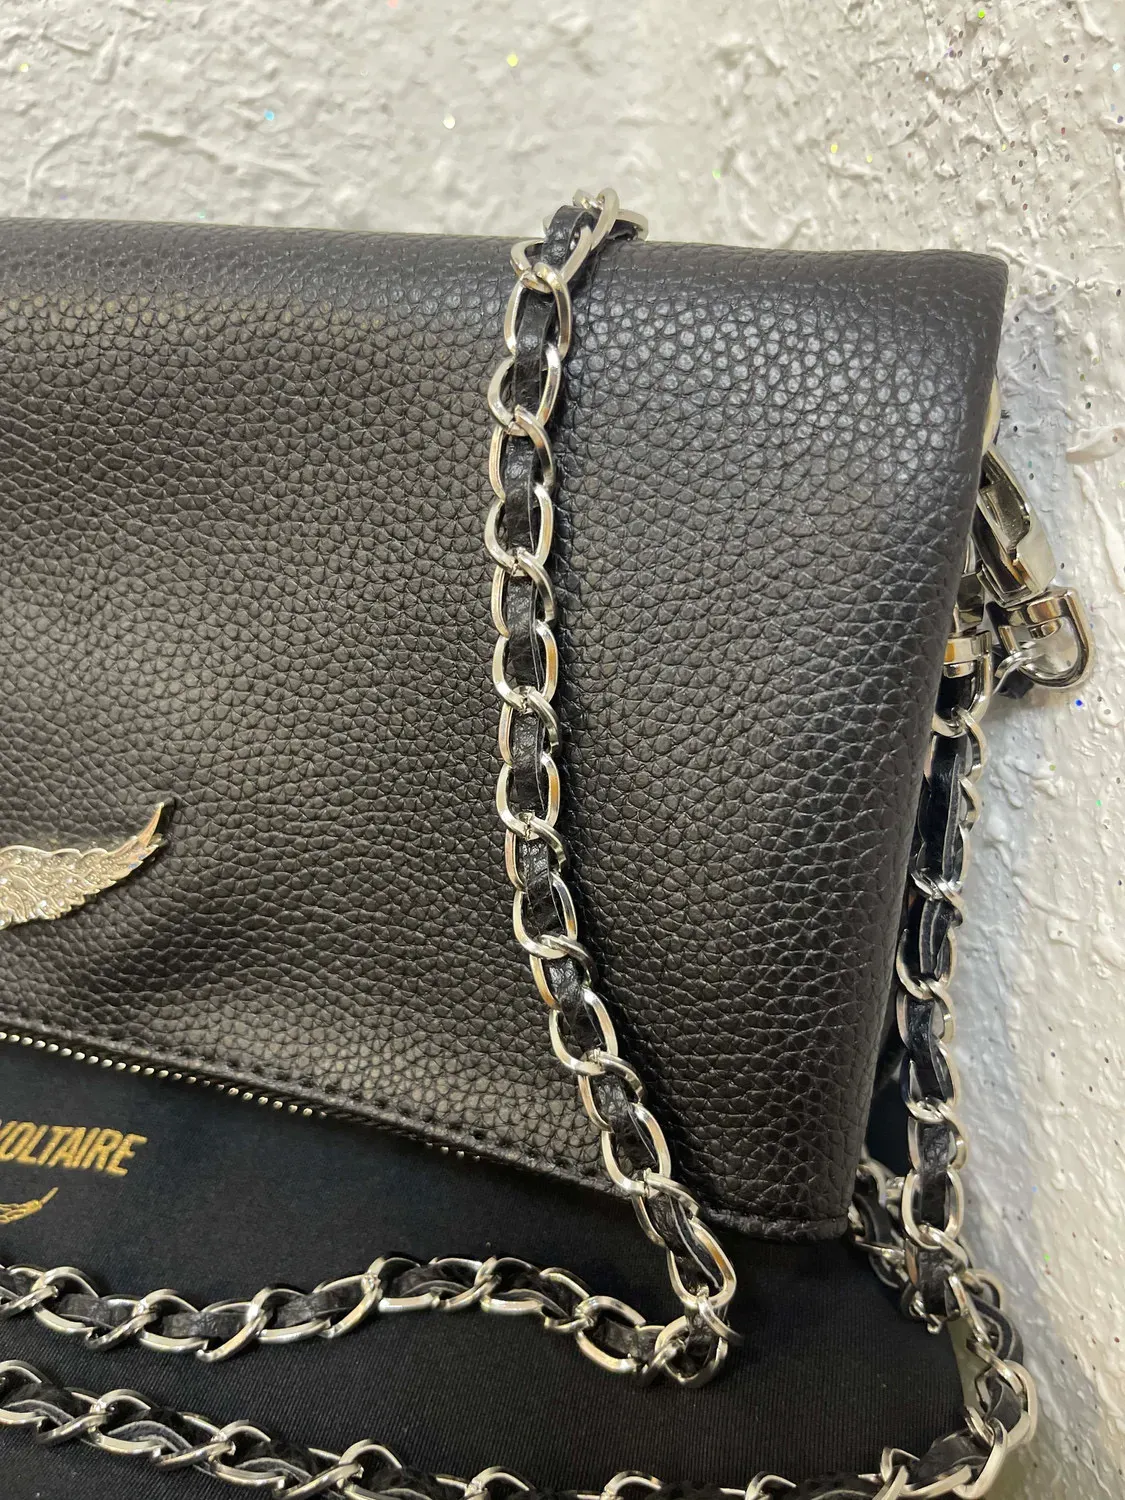 Zadig & Voltaire Genuine Leather Shoulder Bag - Vintage Rivet Design with  Crossbody Chain, High-Grade Quality with Original Box